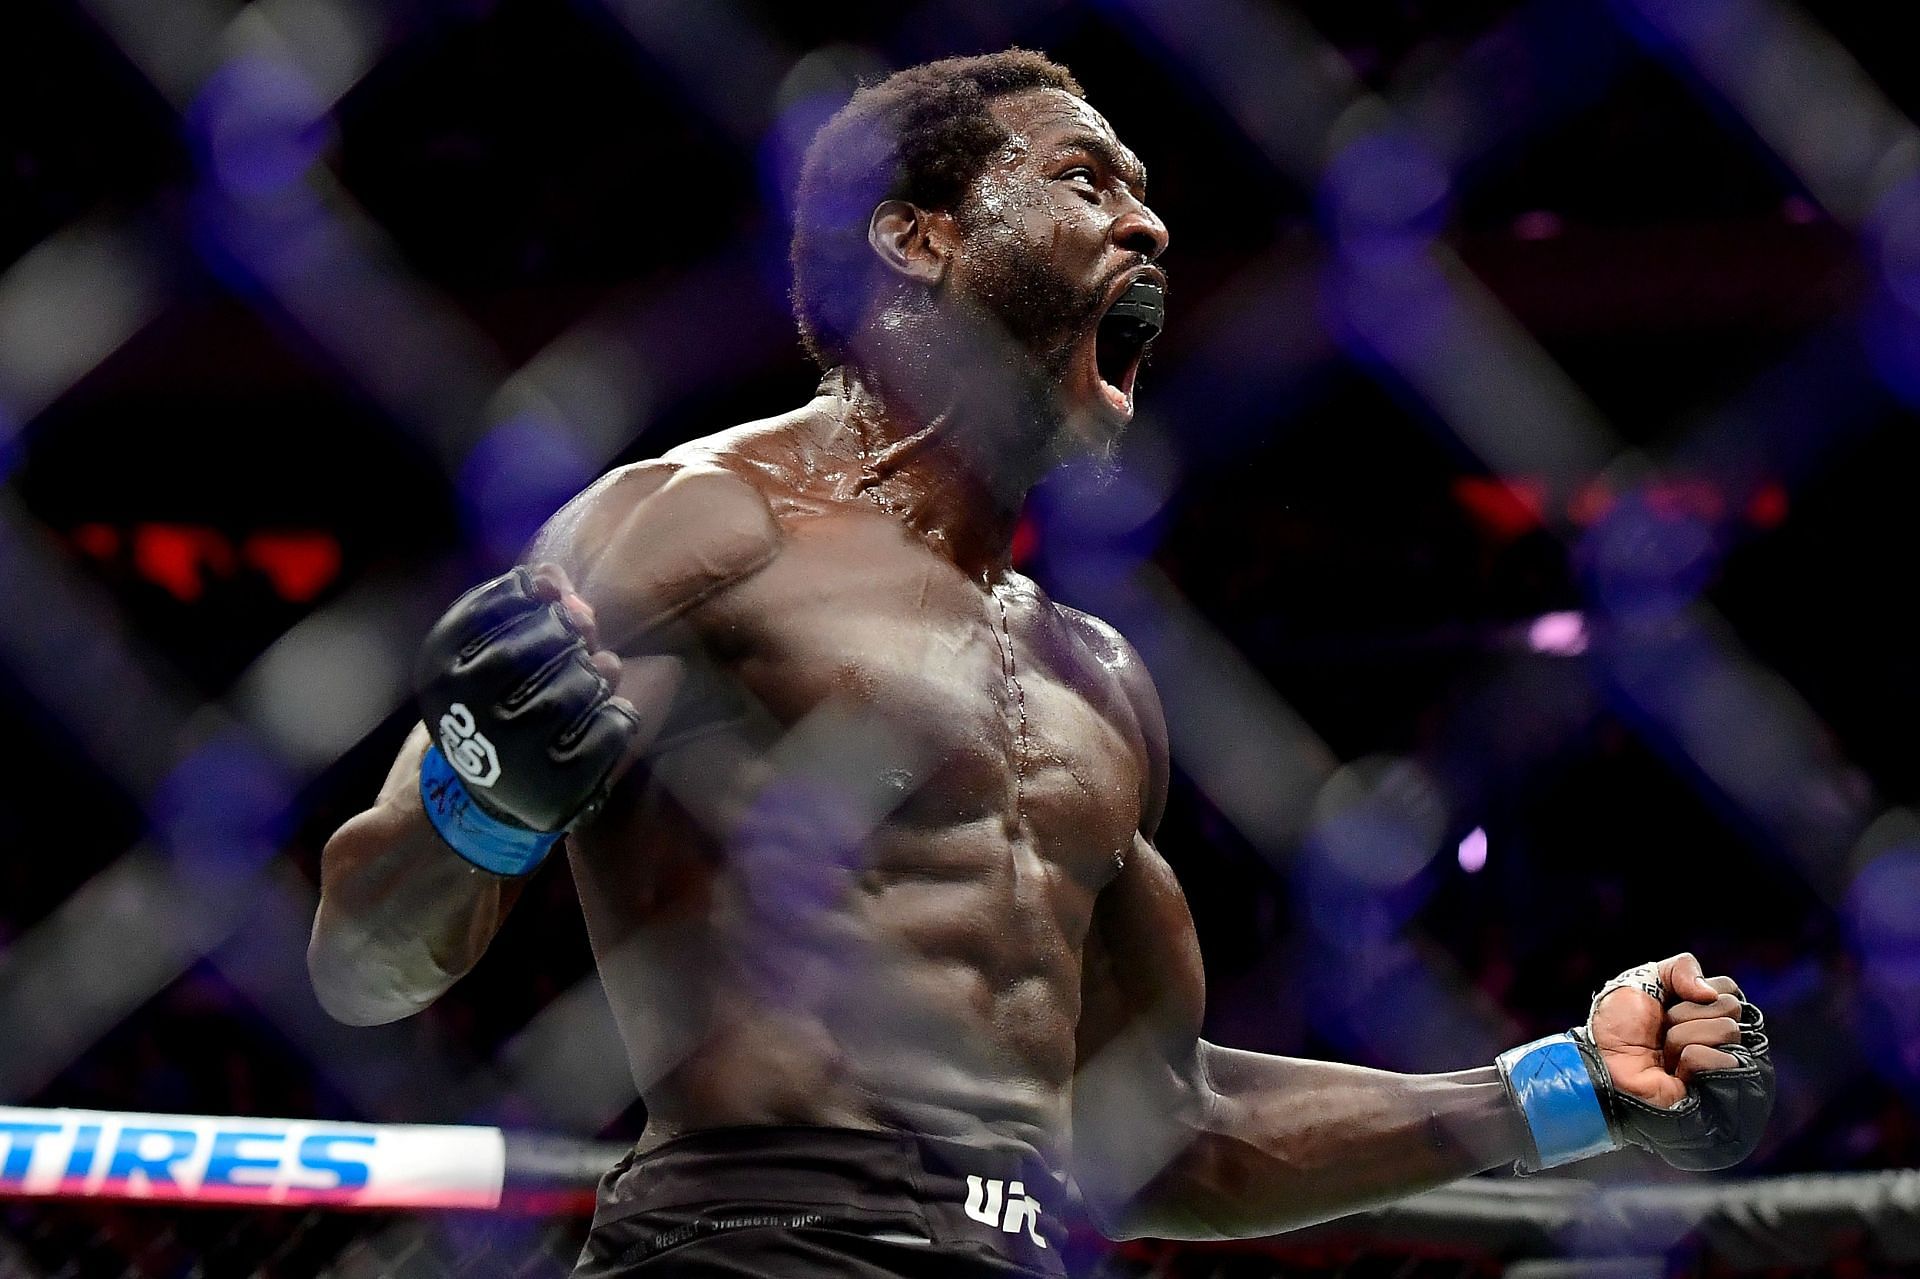 Jared Cannonier carries dangerous power in his punches